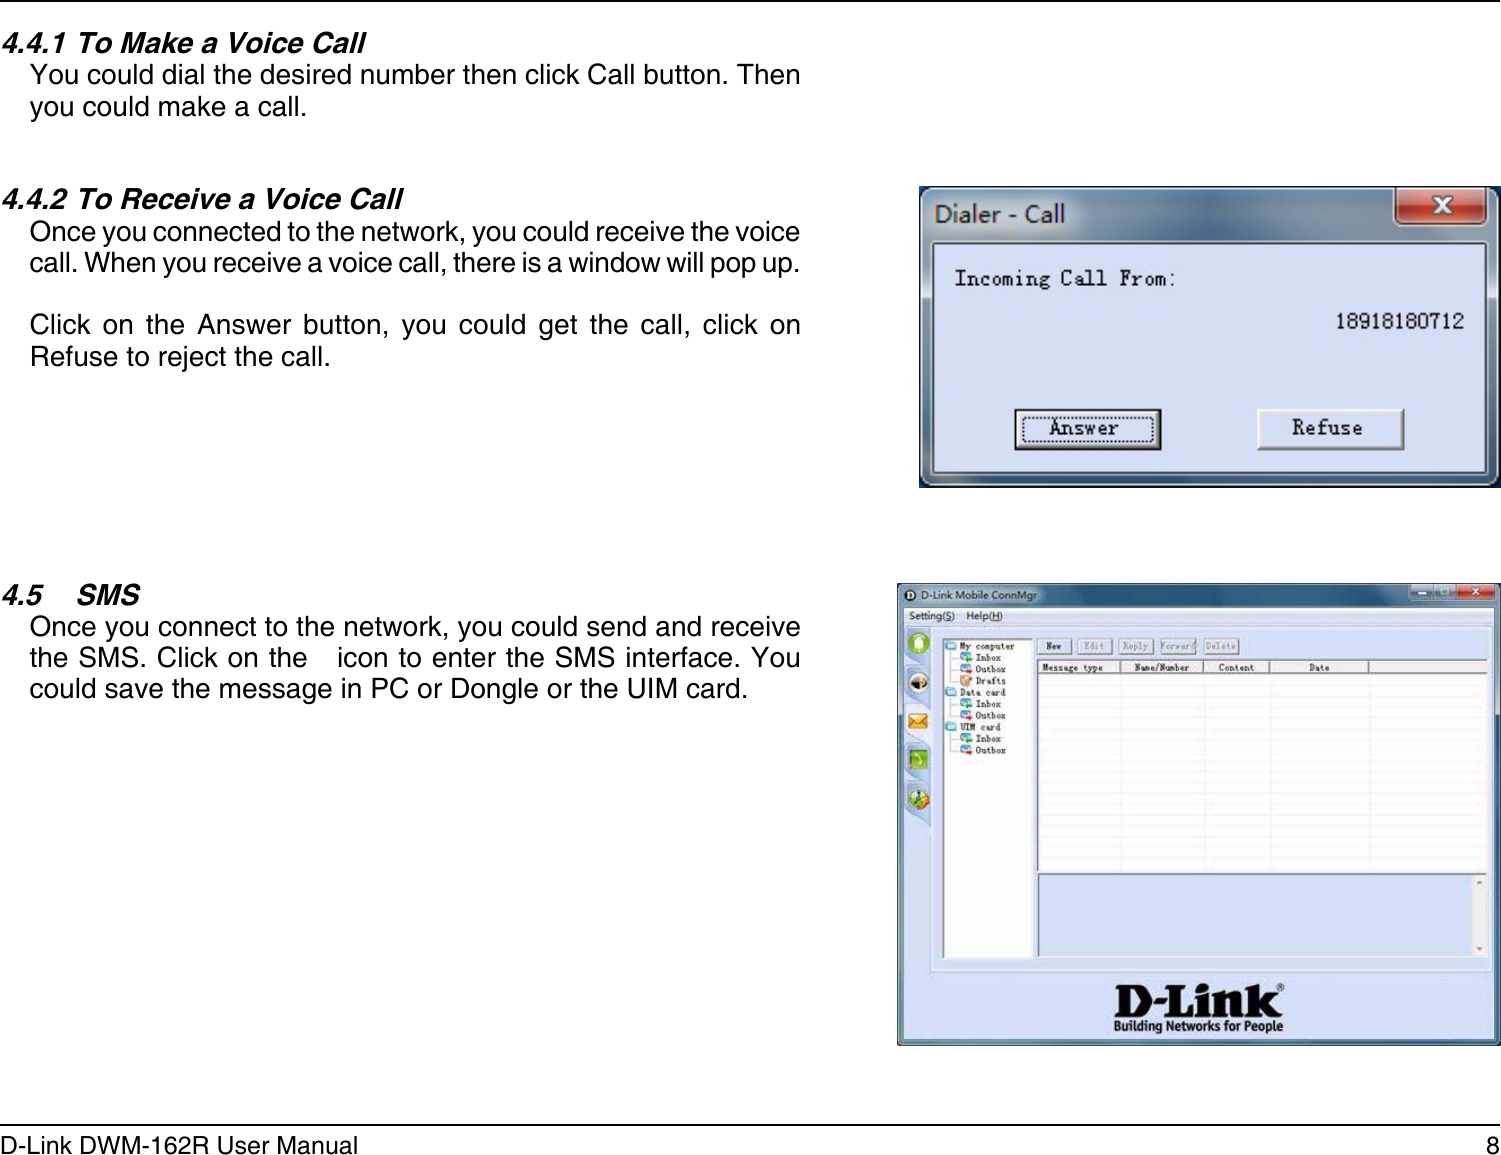 8D-Link DWM-162R User ManualSection 2 - Installation4.5  SMSOnce you connect to the network, you could send and receive the SMS. Click on the   icon to enter the SMS interface. You could save the message in PC or Dongle or the UIM card.4.4.1 To Make a Voice CallYou could dial the desired number then click Call button. Then you could make a call.4.4.2 To Receive a Voice CallOnce you connected to the network, you could receive the voice call. When you receive a voice call, there is a window will pop up. Click  on  the  Answer  button,  you  could  get  the  call,  click  on Refuse to reject the call.